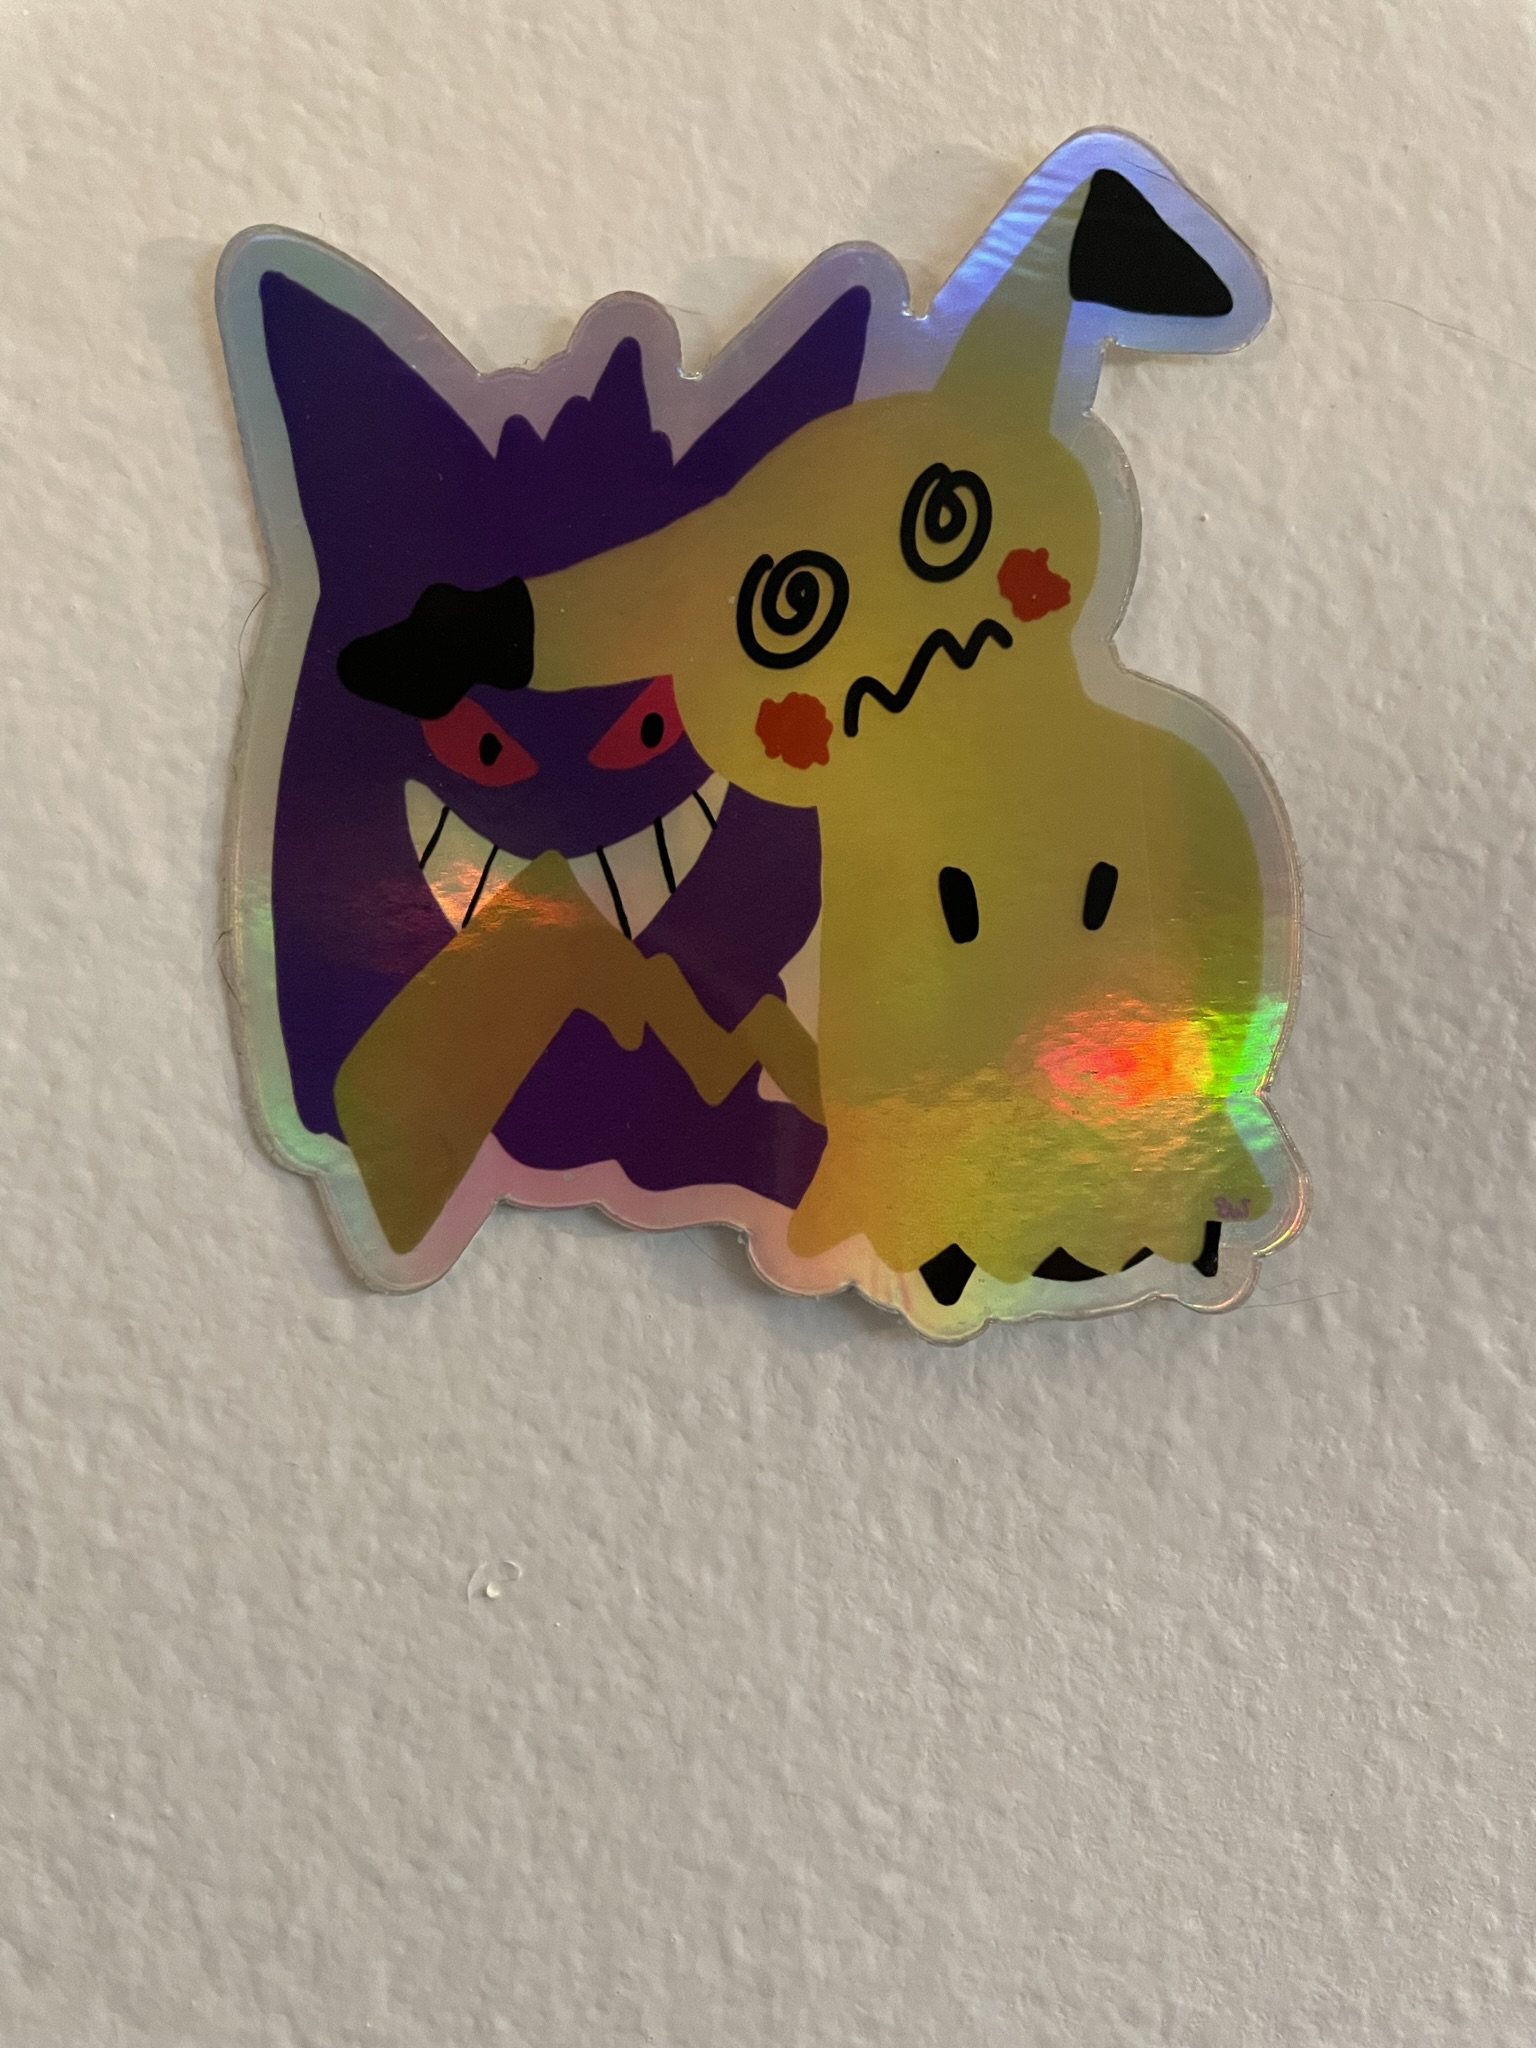 Image of a sticker of the Pokemon mimikyu, with the Pokemon gengar hiding in its shadow..